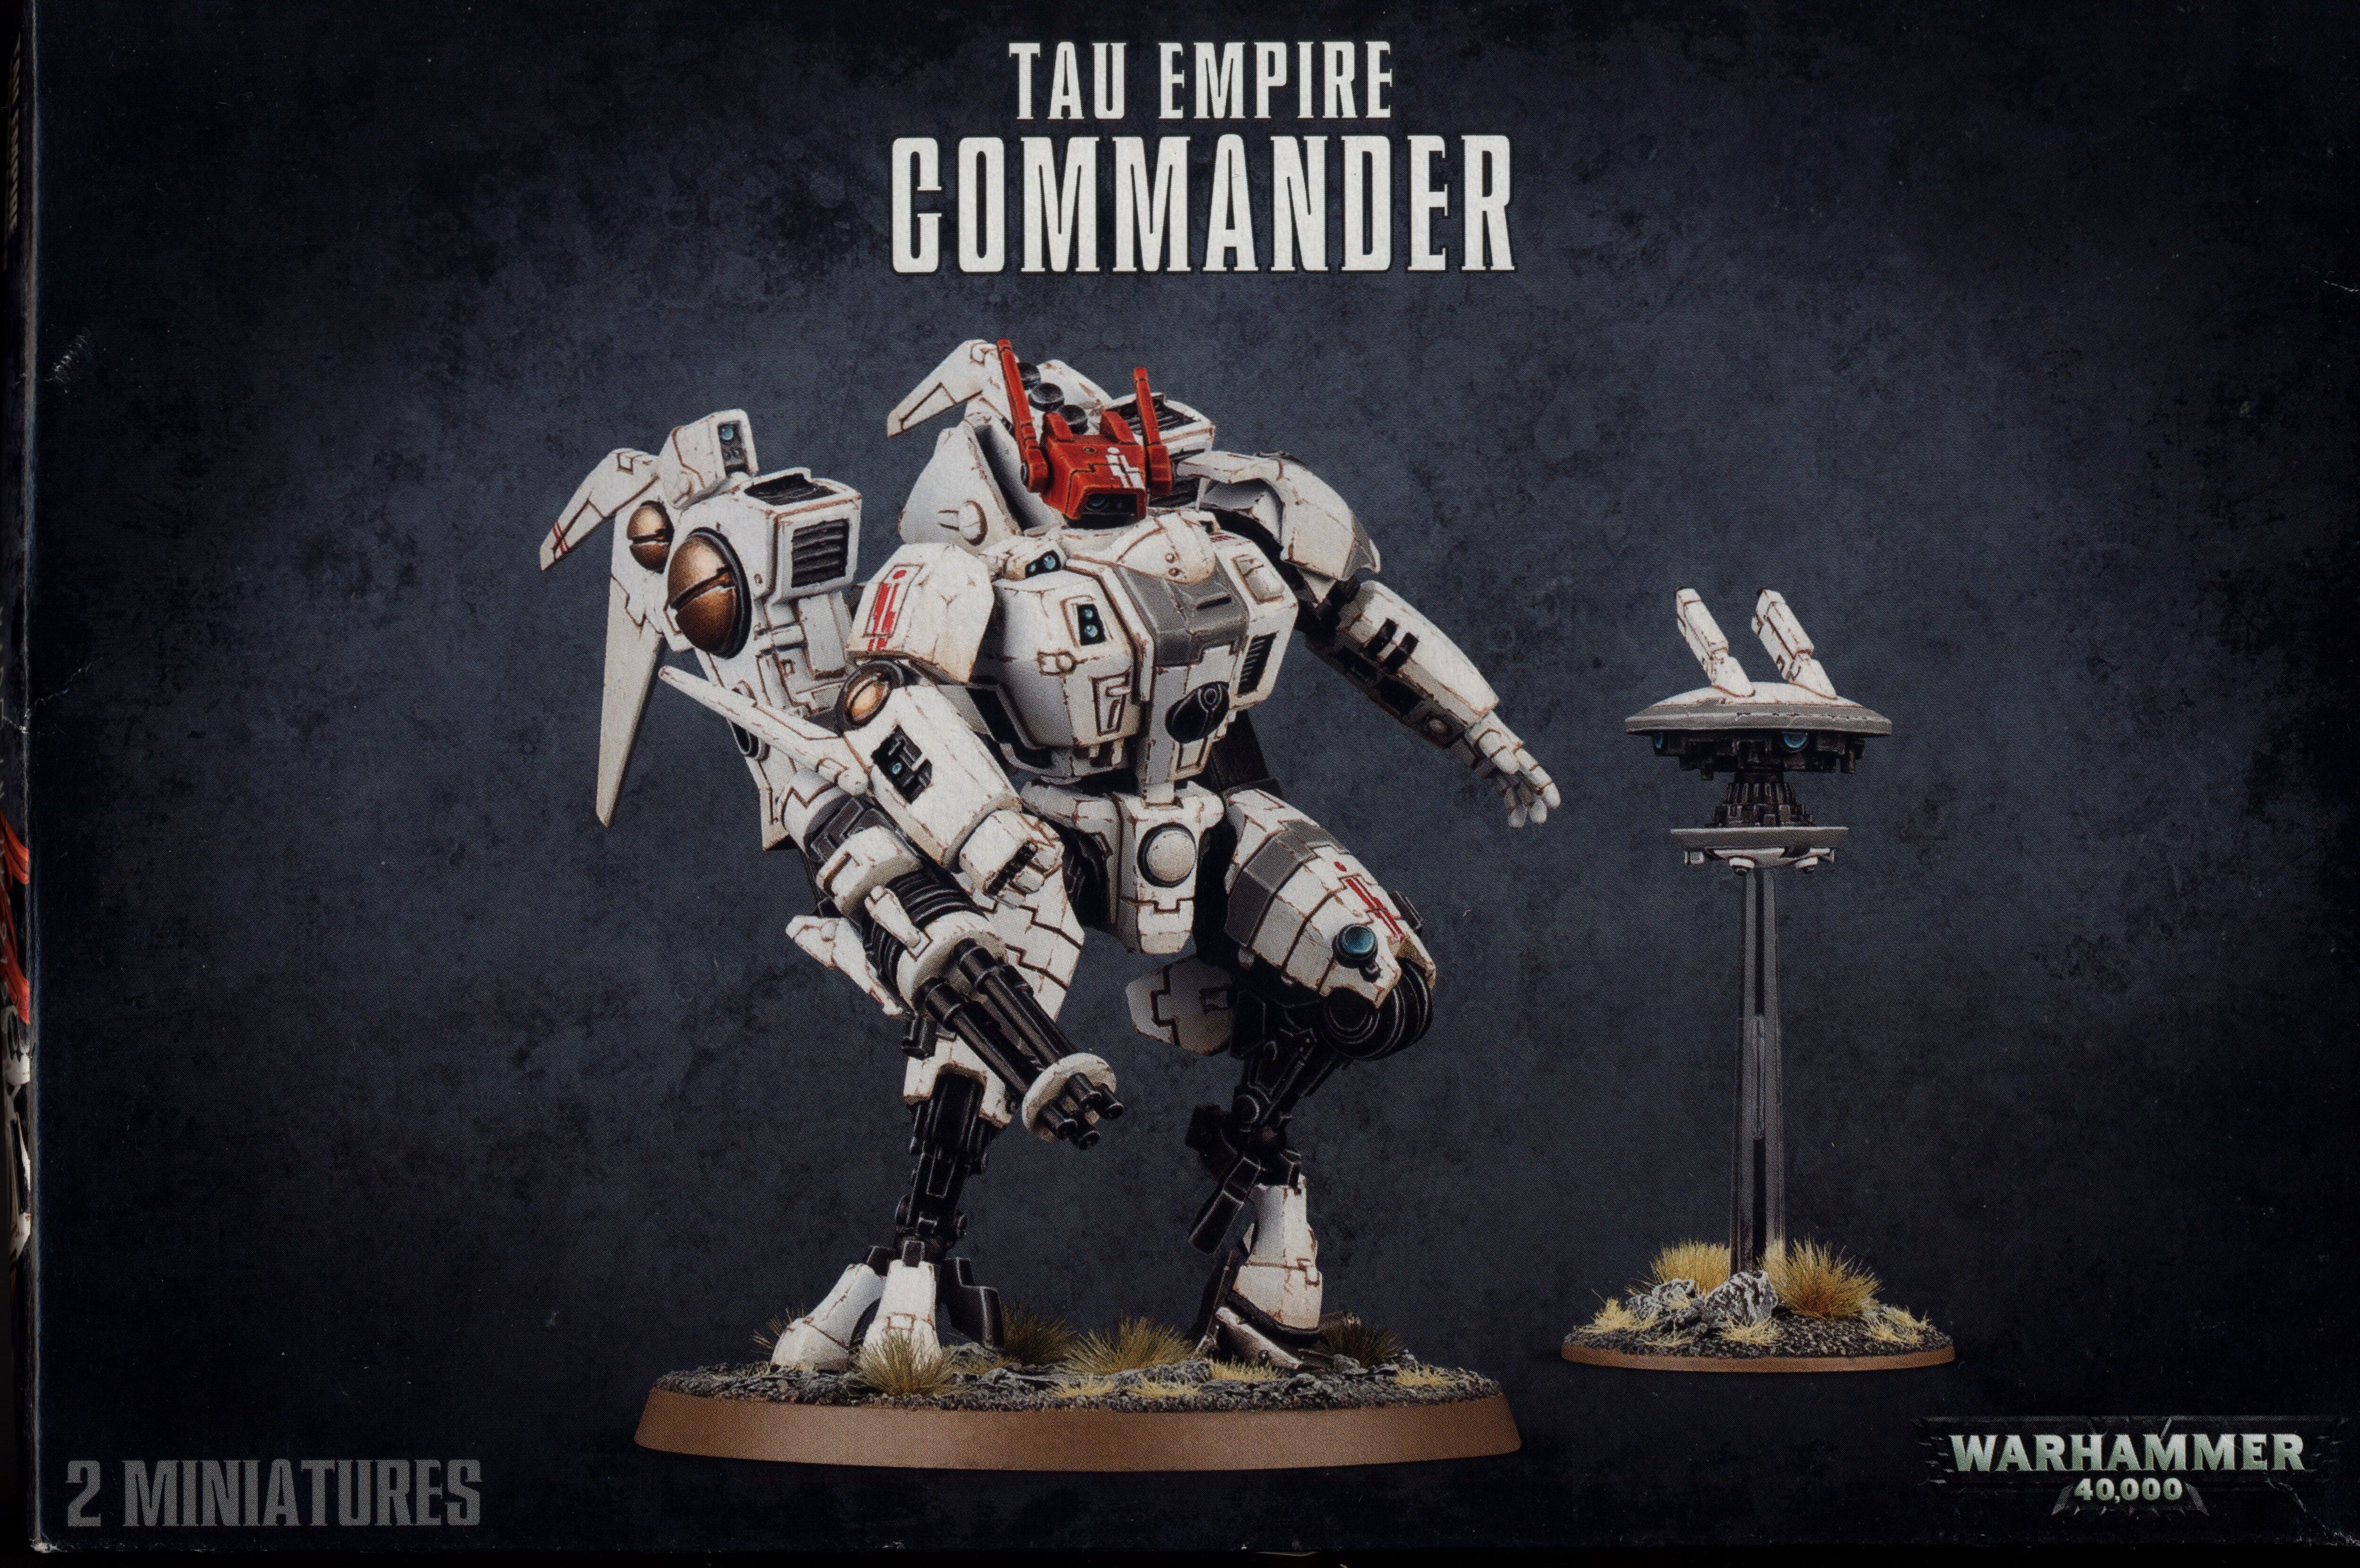 Producto Oficial Games Workshop Warhammer Tau Empire Commander 